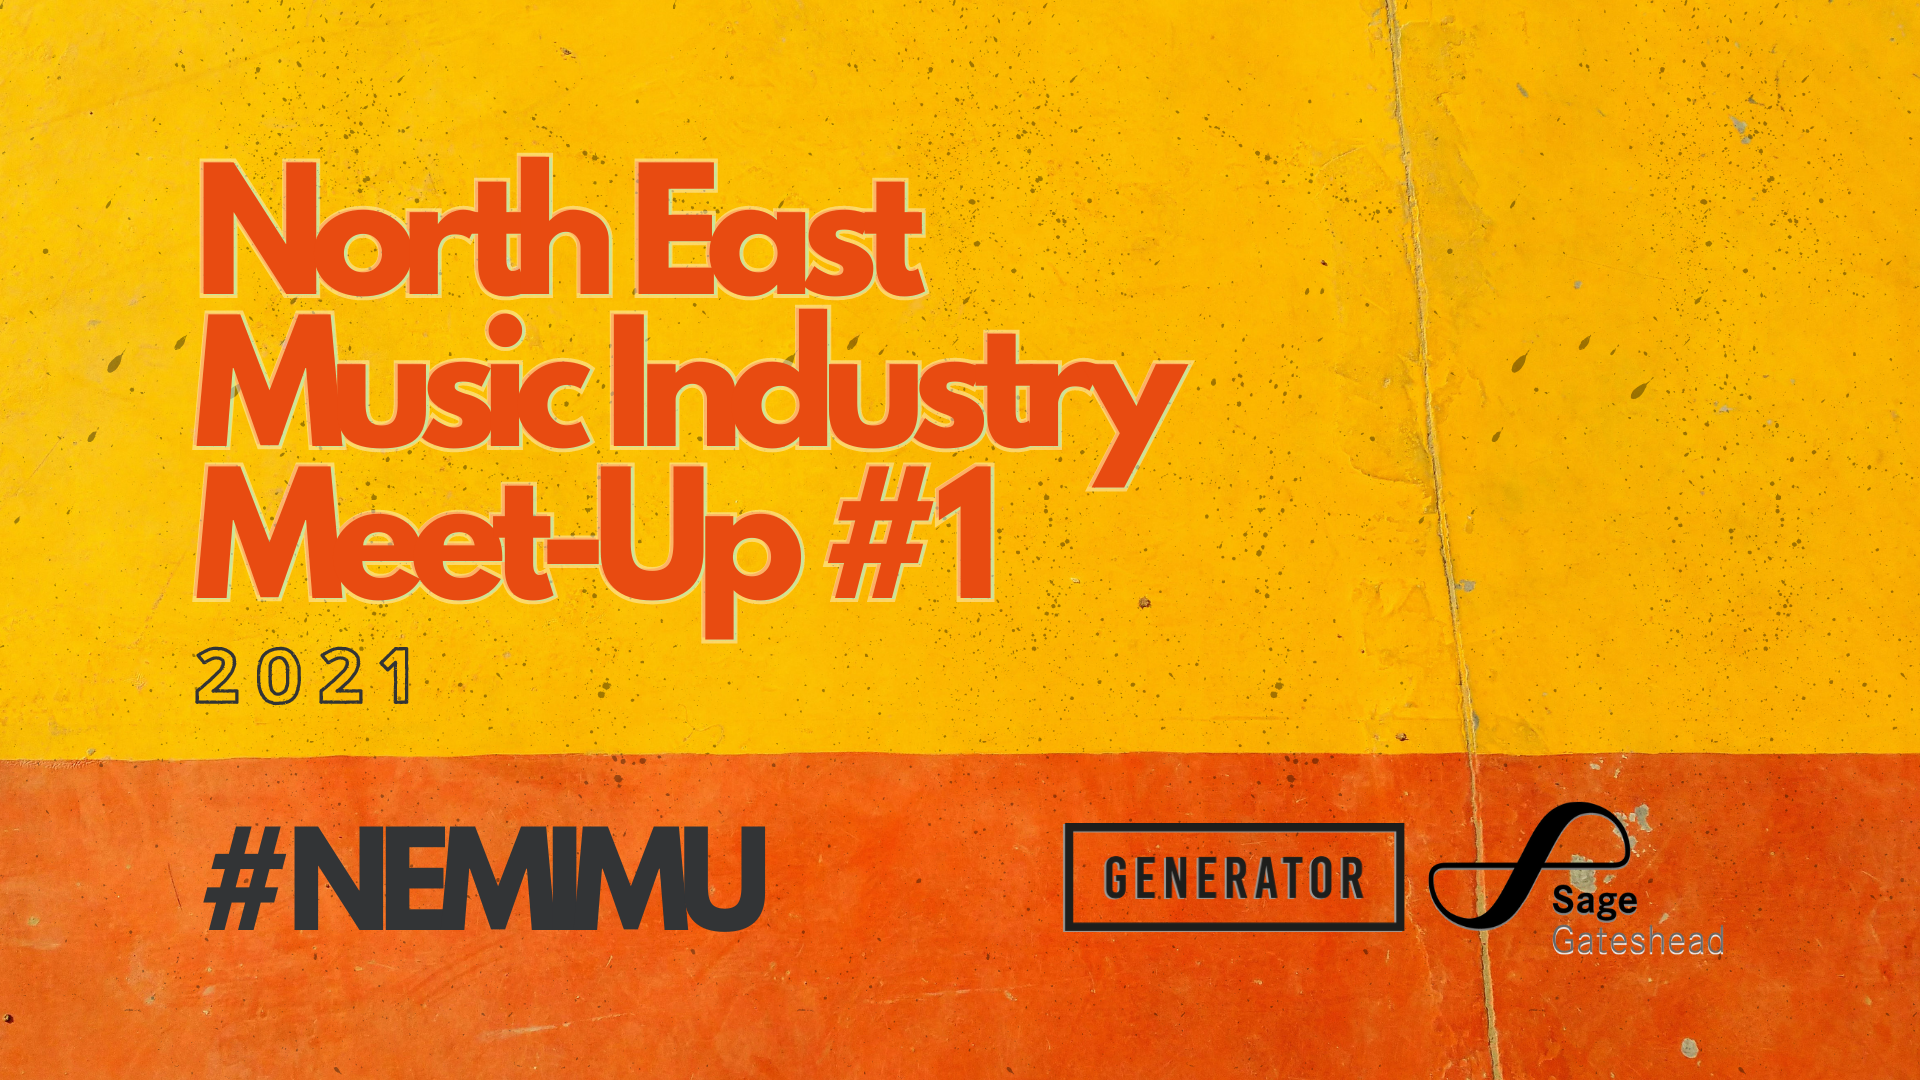 https://generator.org.uk/wp-content/uploads/2021/02/North-East-Music-Industry-Meet-Up-2021-facebook-event-1.png